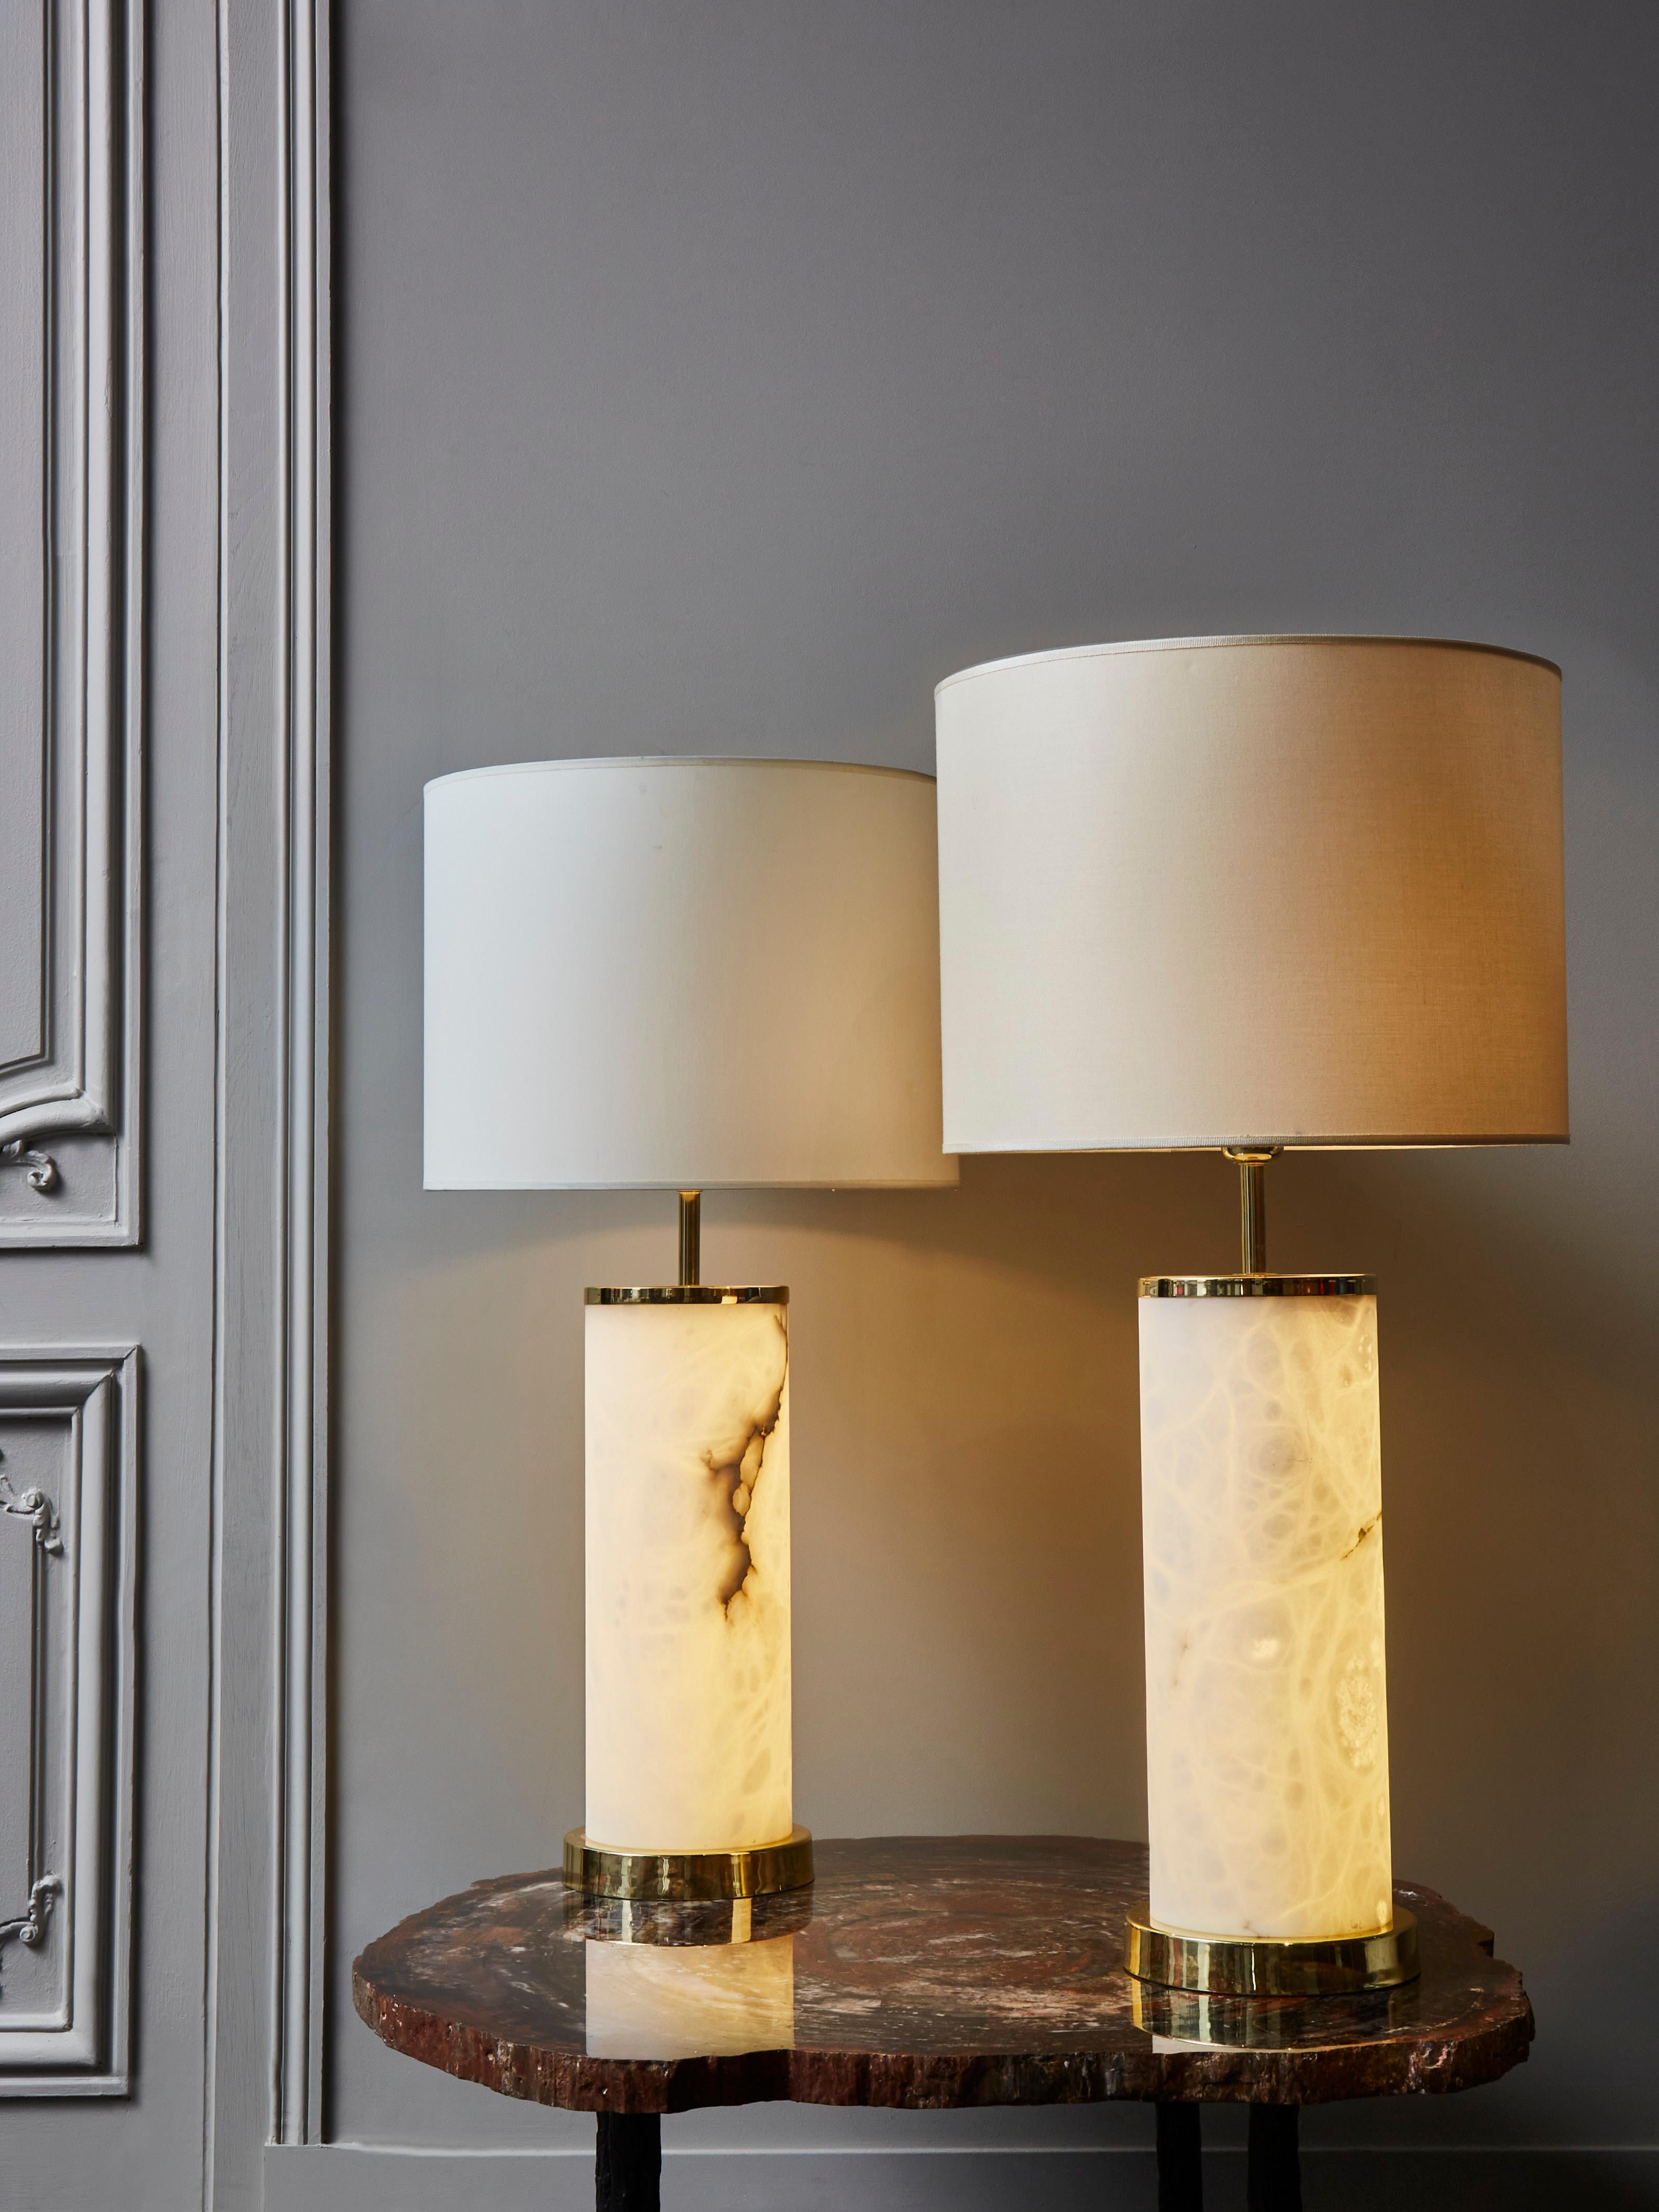 Pair of brass and alabaster table lamps by Glustin Luminaires.

Tall enlightened alabaster cylinders, set by alabaster feet and upper ring.